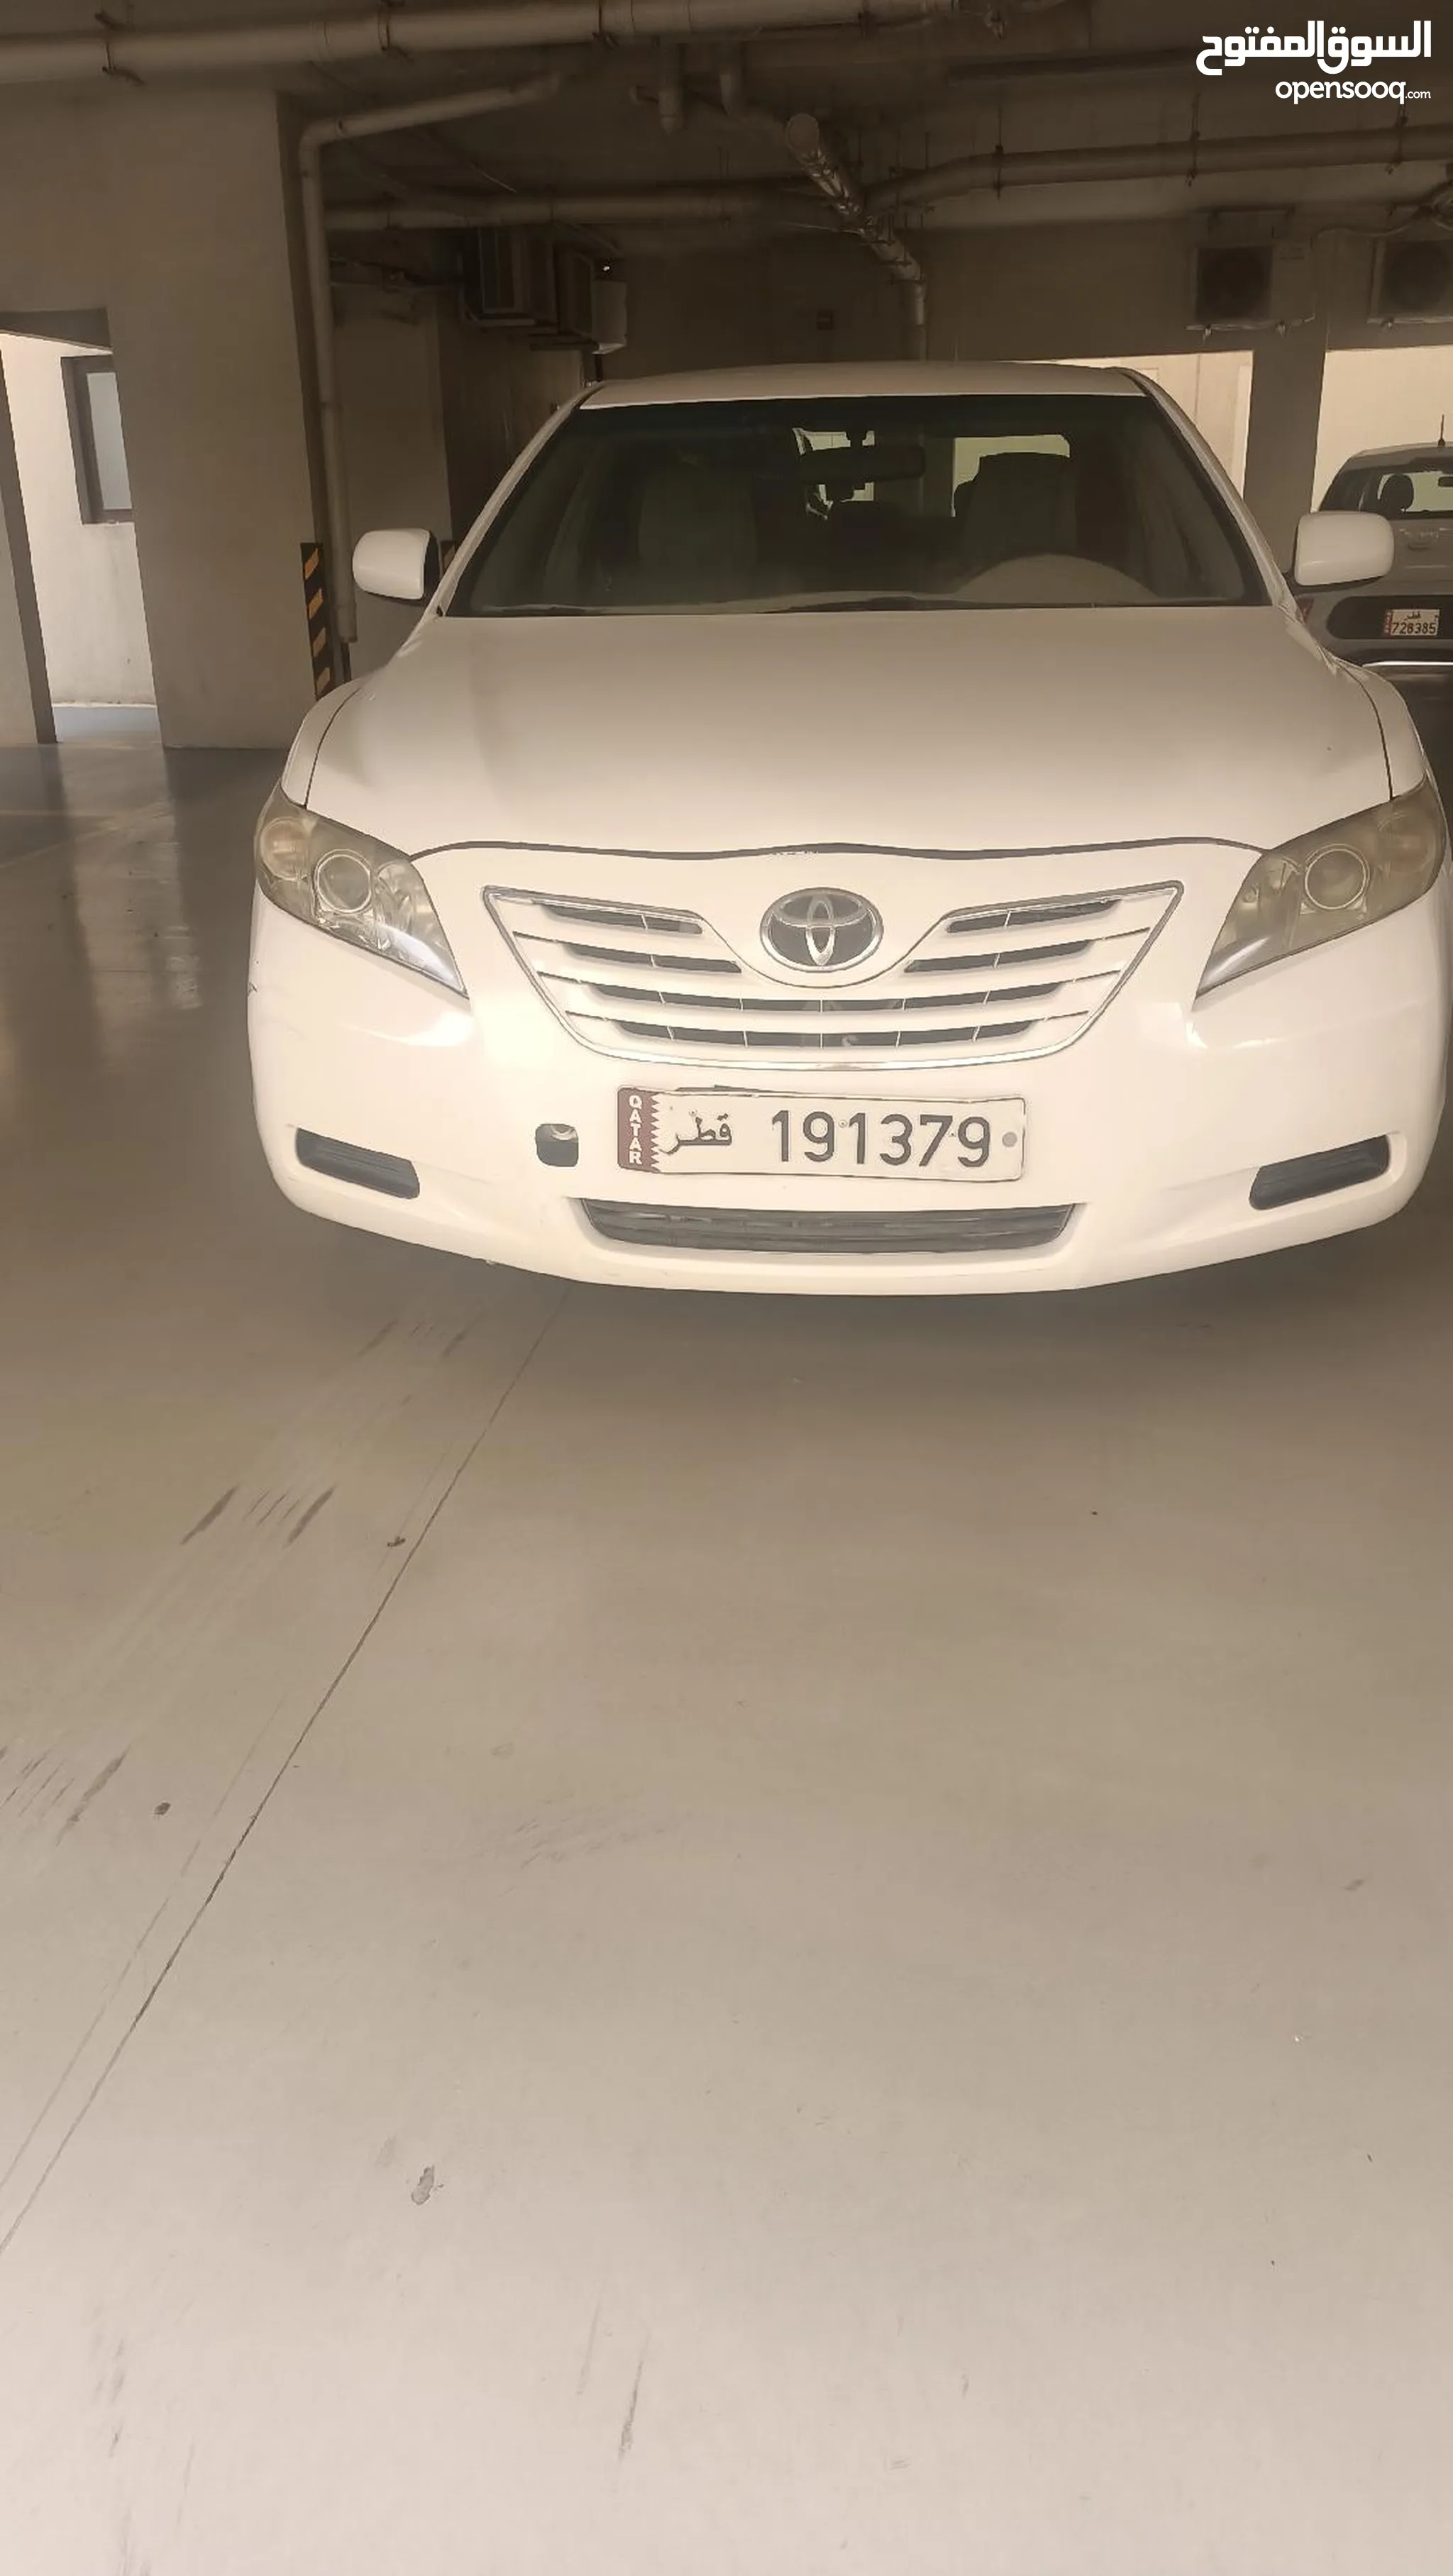 Cars For Sale in Qatar | Used & New | Second Hand | Prices | OpenSooq